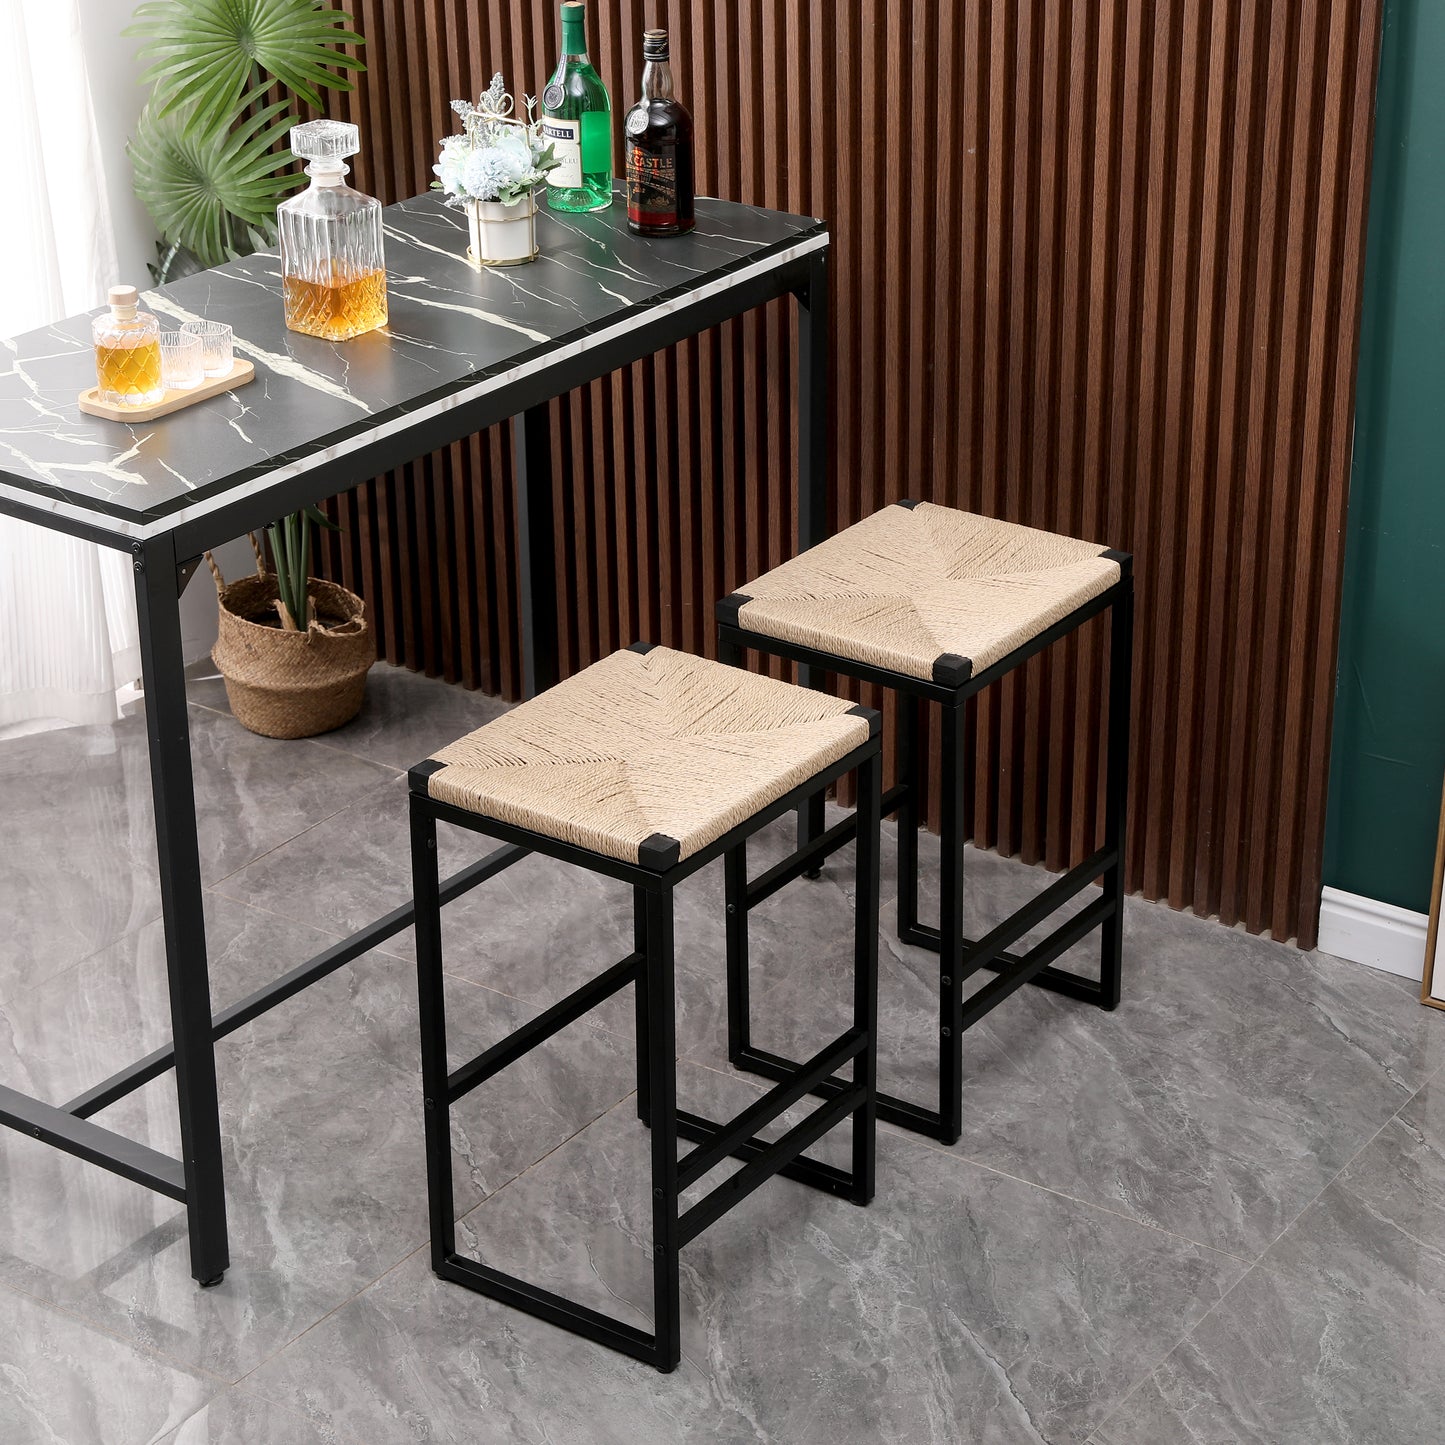 Backless Bar Stools for Kitchen Counter Set of 2